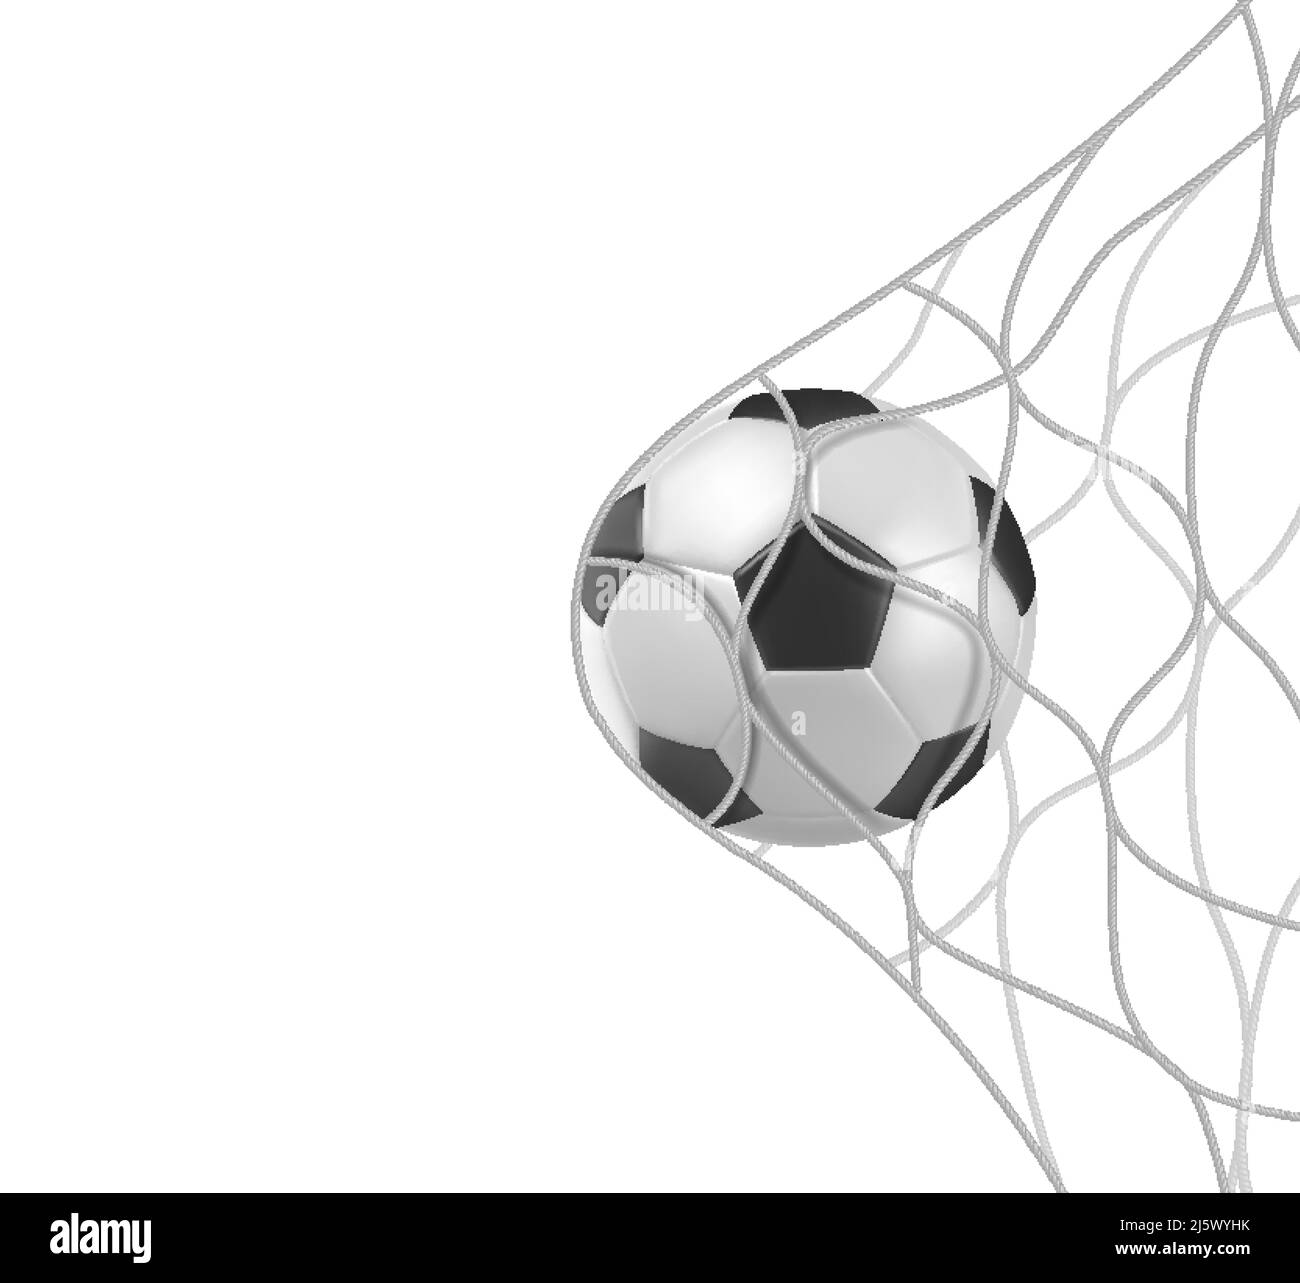 Soccer or football ball in goal net isolated on white background, sports accessory, equipment for playing game, championship or competition, design el Stock Vector